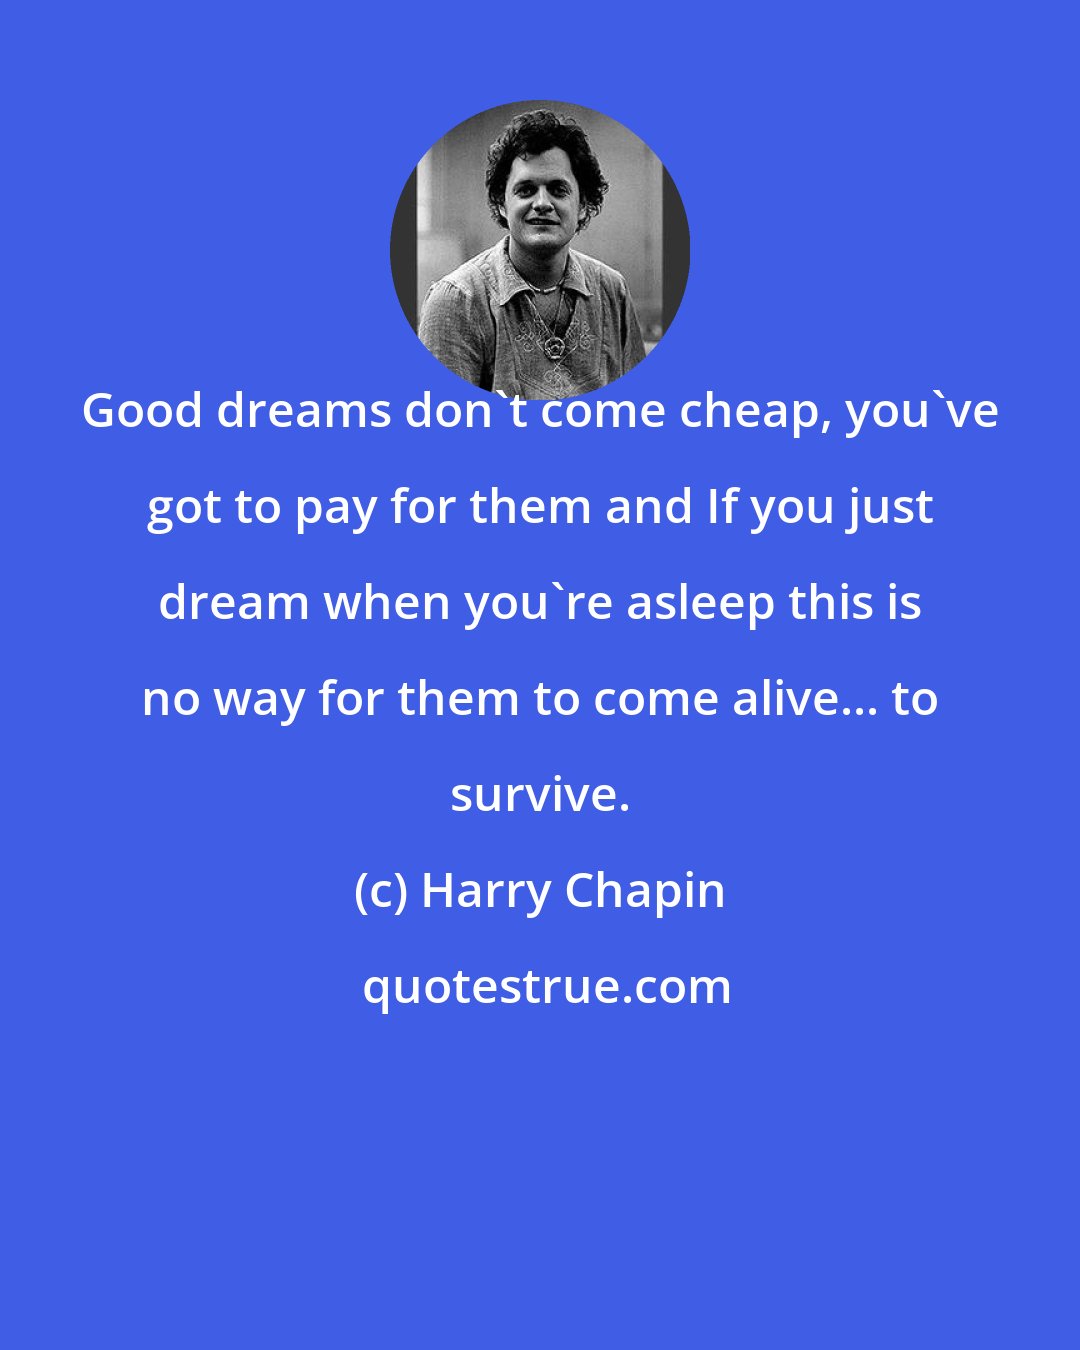 Harry Chapin: Good dreams don't come cheap, you've got to pay for them and If you just dream when you're asleep this is no way for them to come alive... to survive.